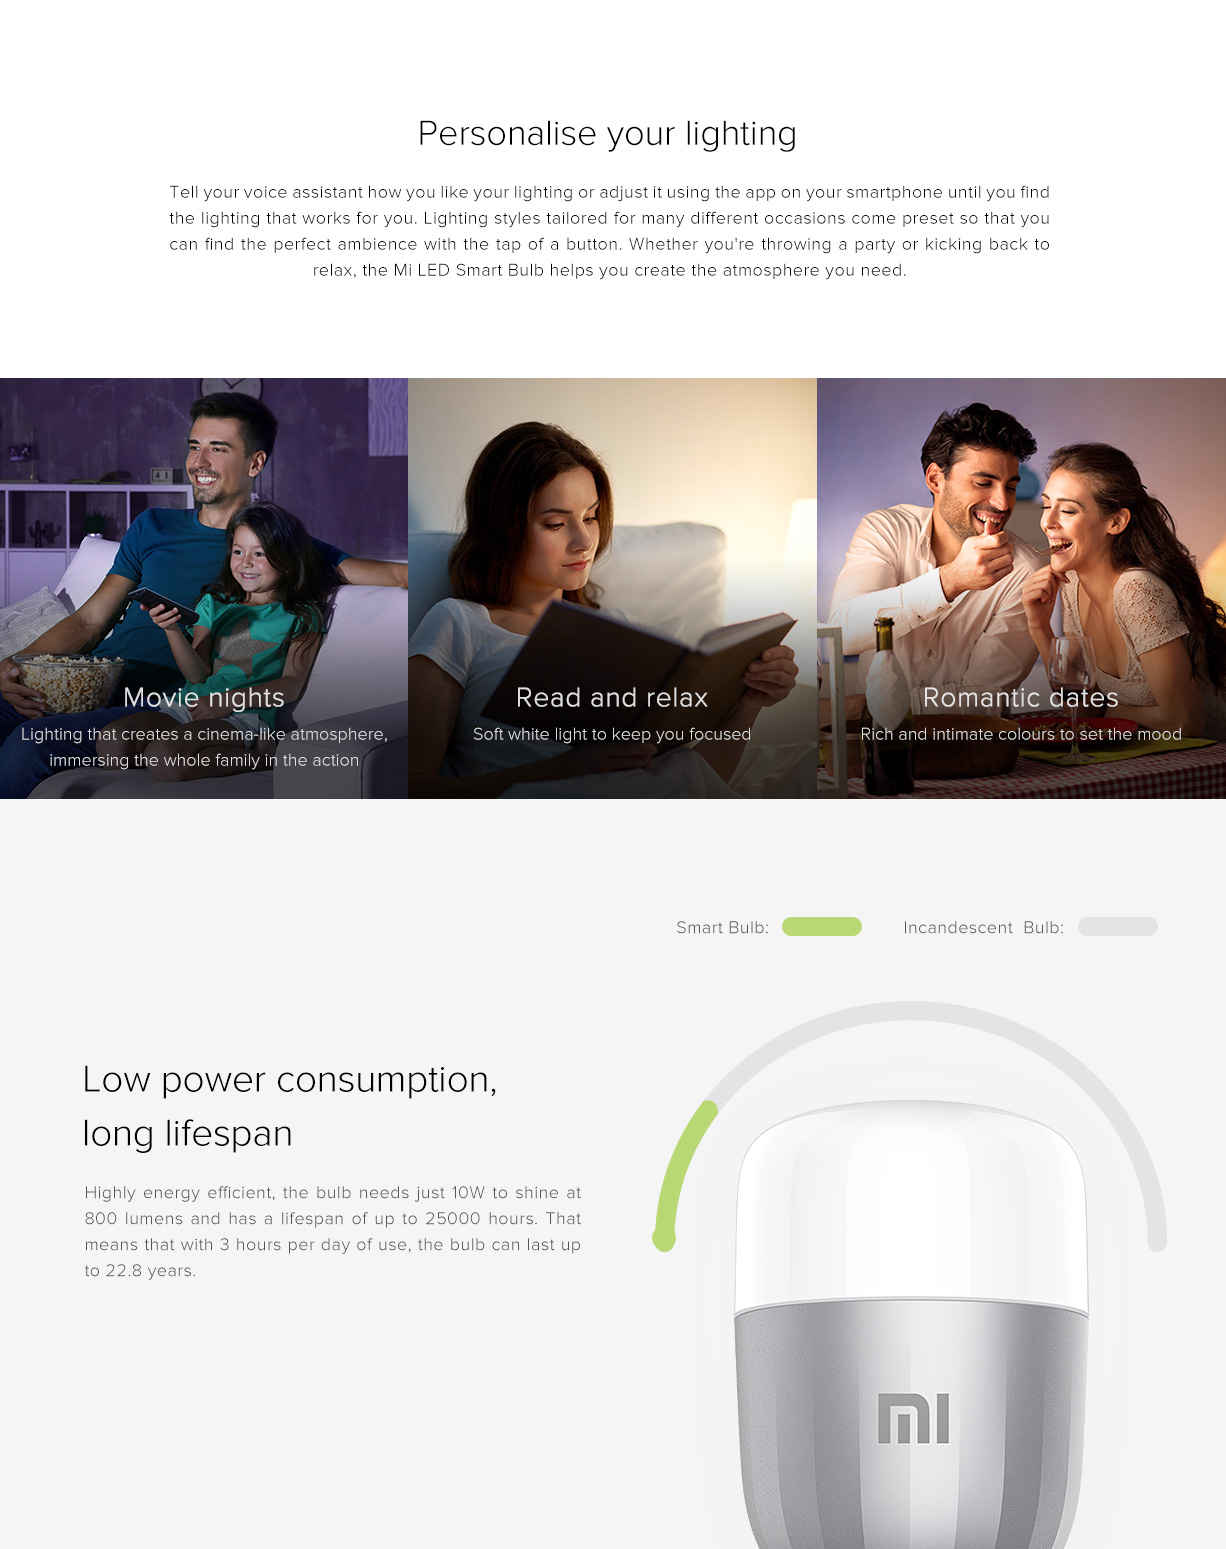 36218700 50A5 1119 55B1 5722Ebff2738 Xiaomi Xiaomi Mi Smart Led Bulb Essential(White And Color) Wifi Remote Control Smart Light Work With Alexa And Google Assistant, Voice Control, Wifi Connection, Adjustable Color Temperature, Scheduled On/Off, Smart App Control Xiaomi Mi Led Xiaomi Mi Led Smart Bulb Essential Bulb (White And Color)(10W)